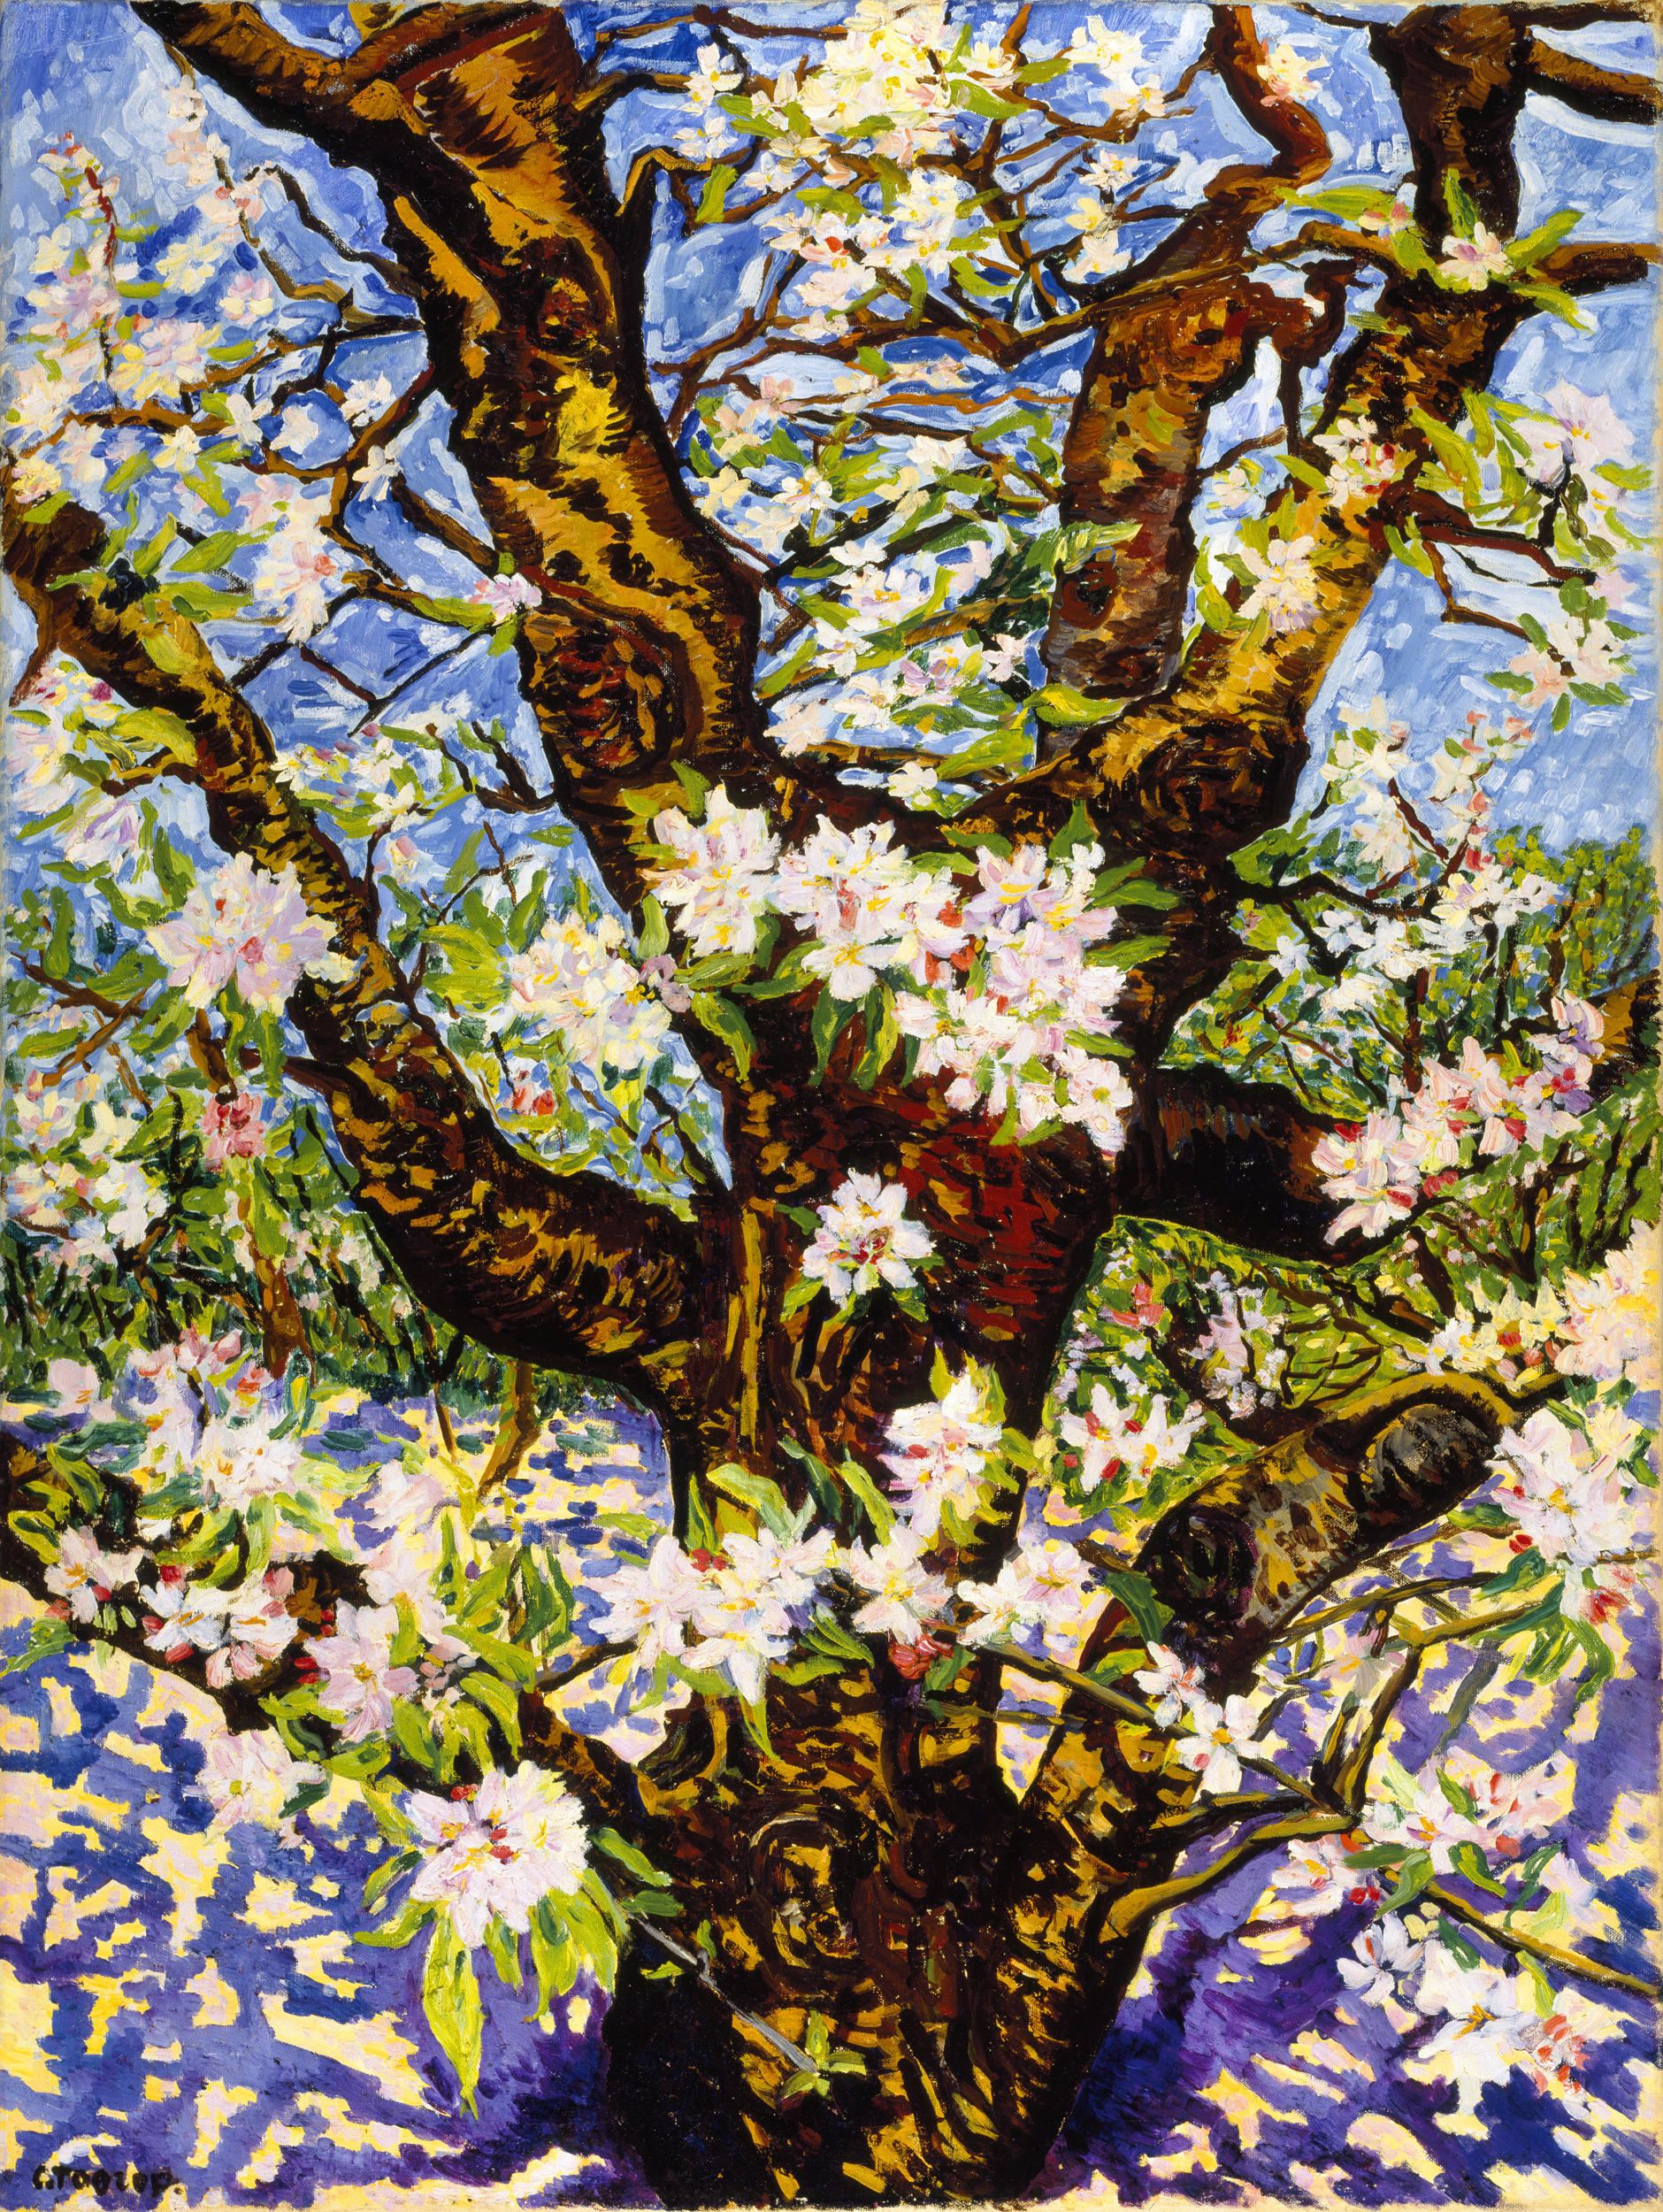 Old Apple Tree Blossoming by Charley Toorop - 1949 - 120 x 90 cm Kröller-Müller Museum